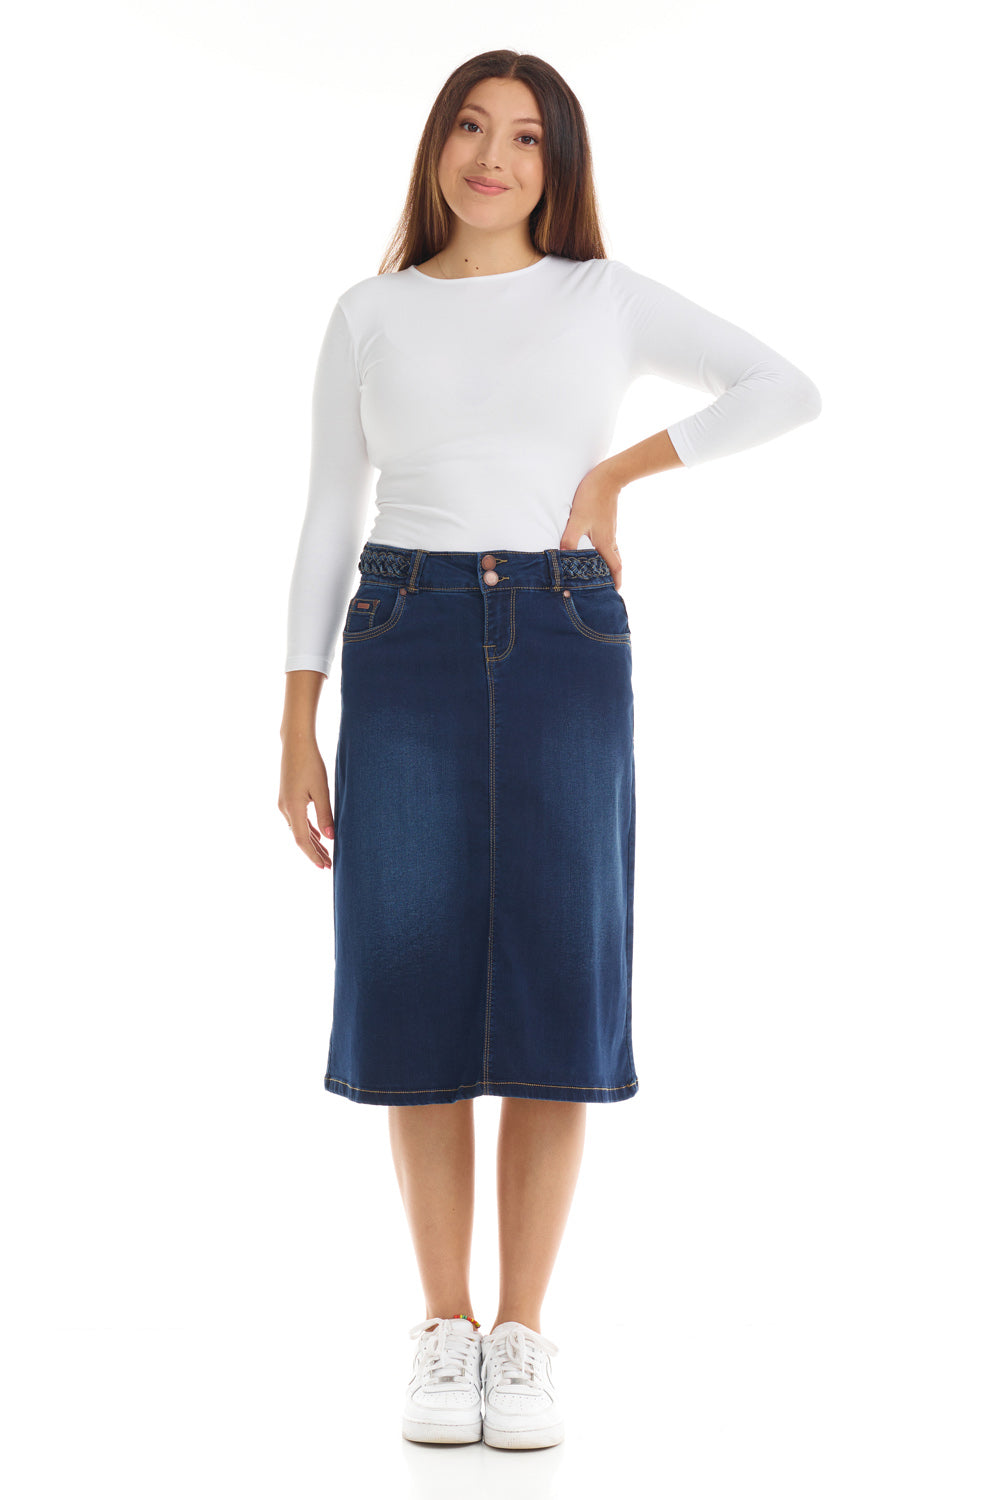 blue classic 5 pocket A-line denim jean skirt with woven braided belt and contrast stitching